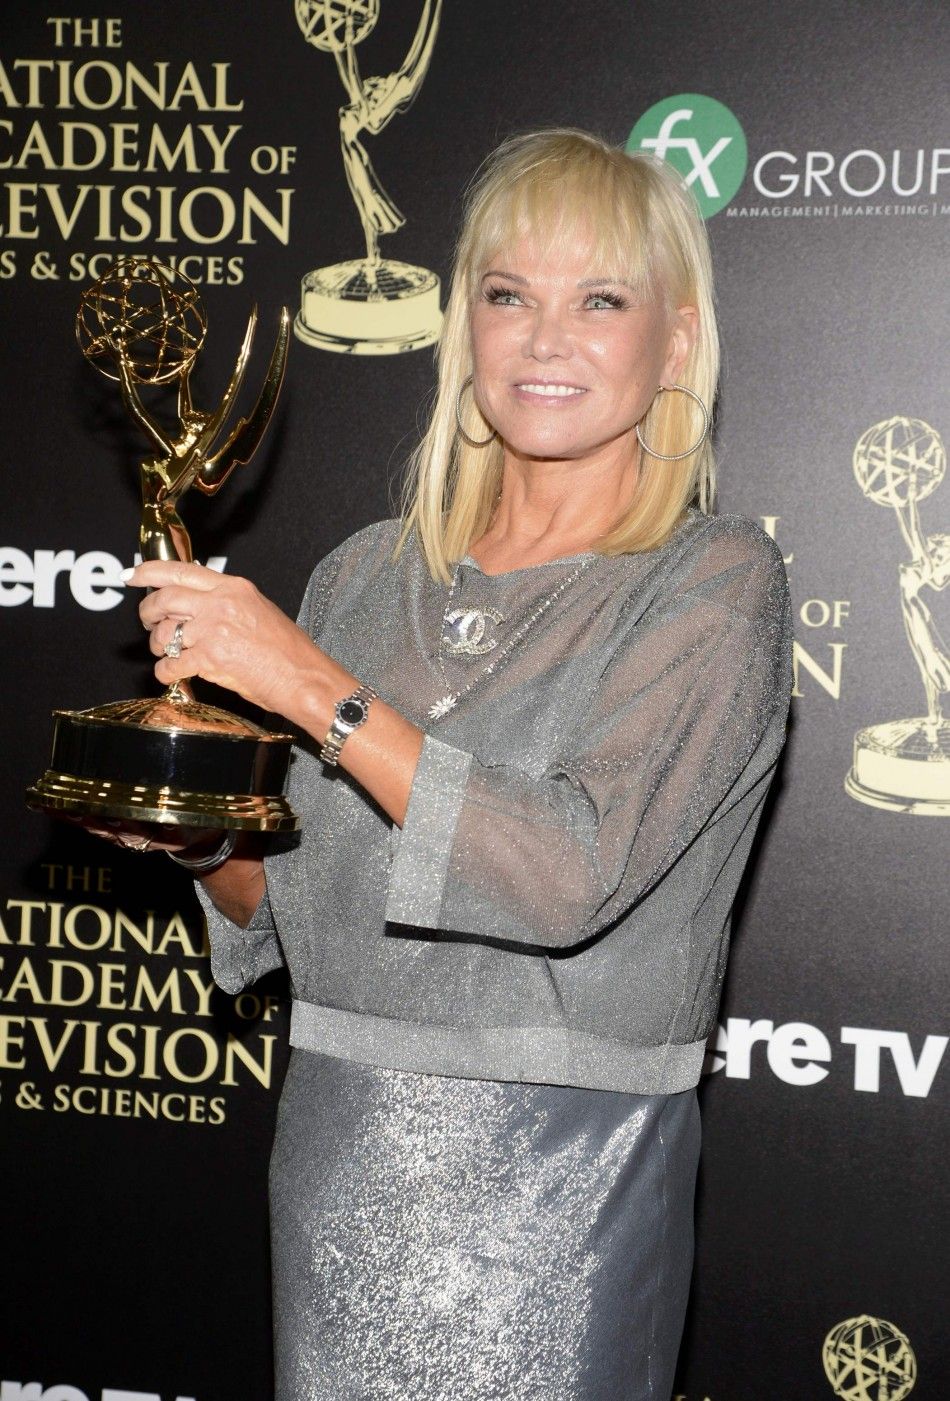 Linda Bell Blue of Entertainment Tonight Poses Backstage with the Award for Outstanding Entertainment News Program During the 41st Annual Daytime Emmy Awards in Beverly Hills